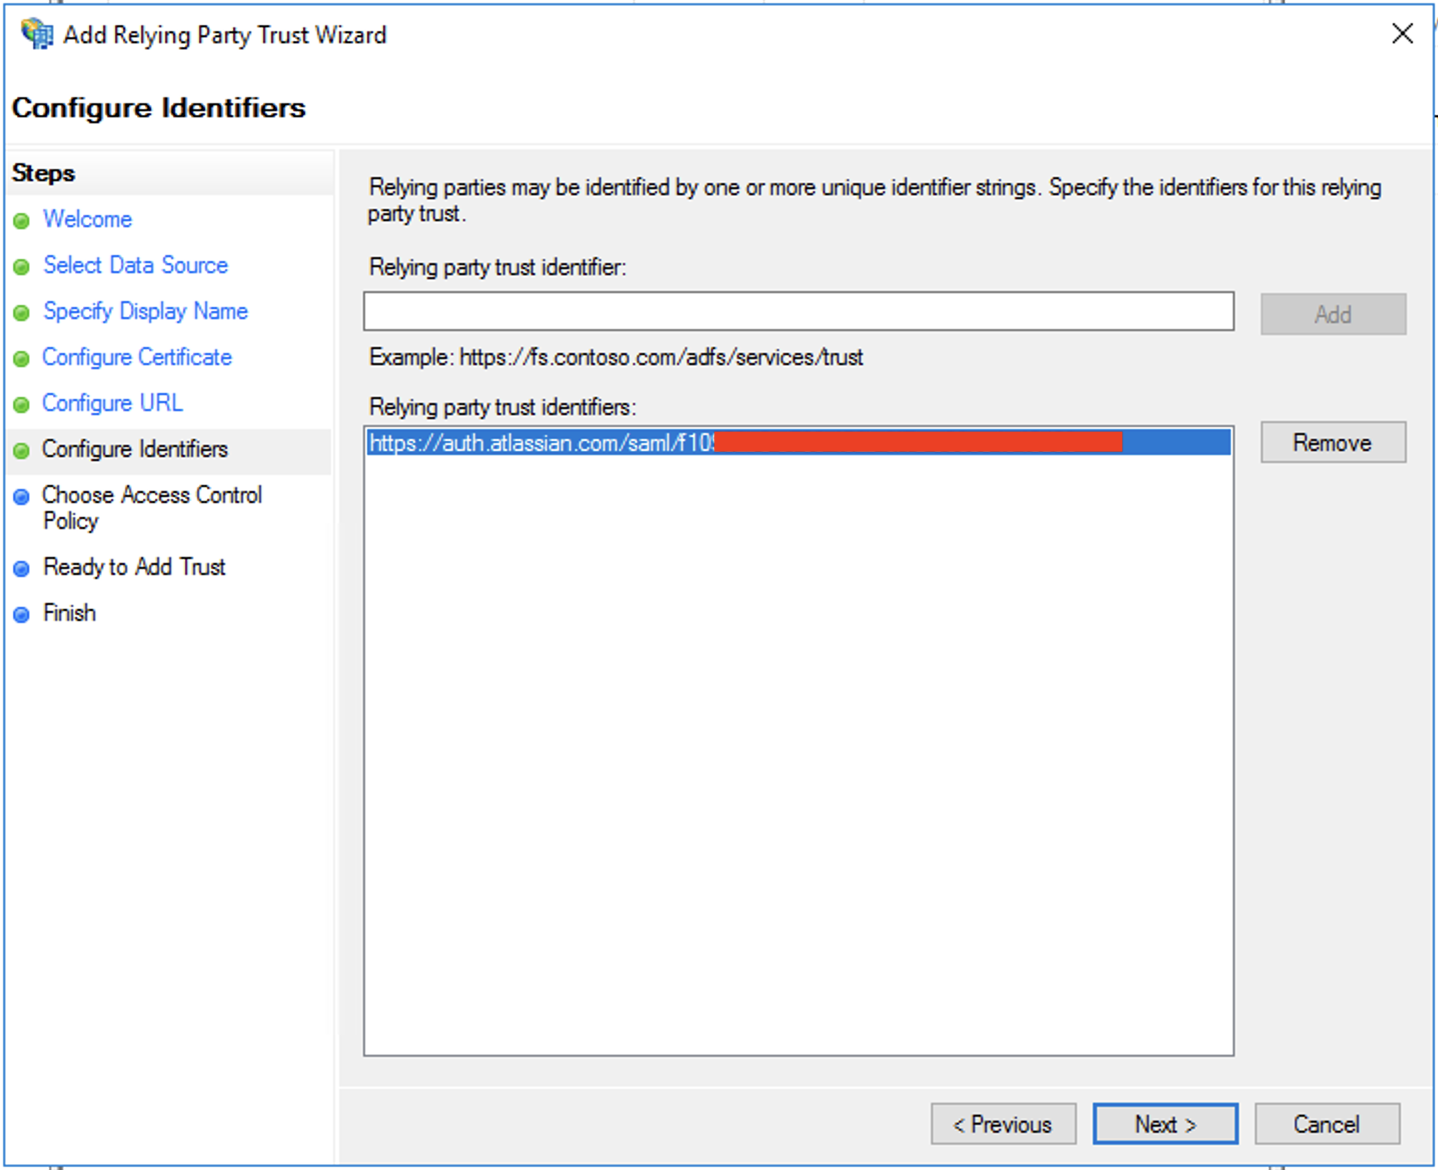 Add relying party trust wizard, configure identifiers step